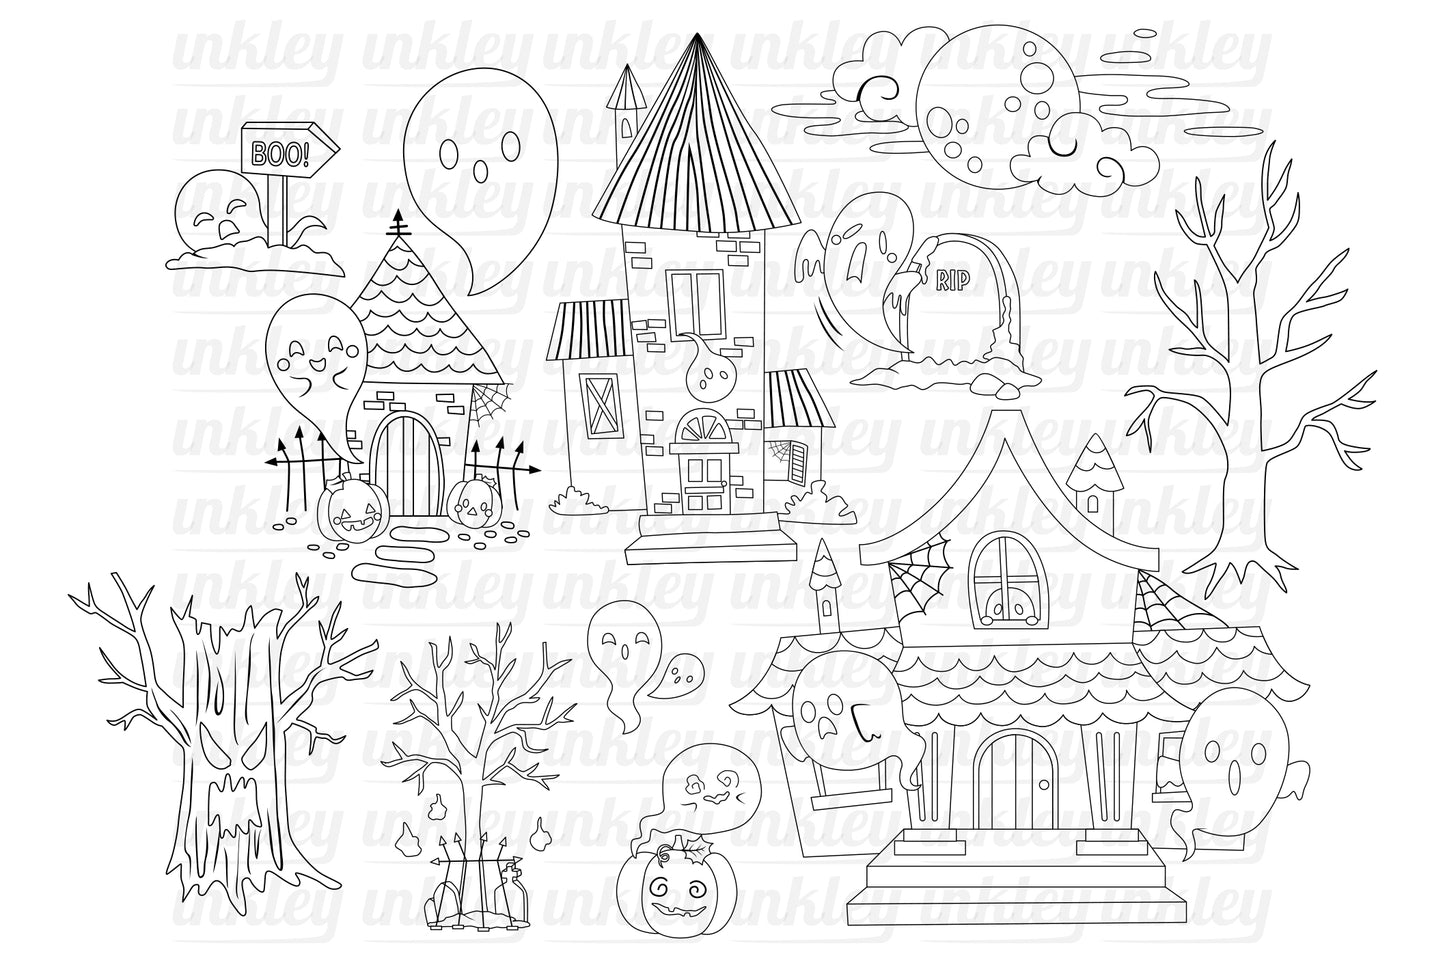 Haunted House Clipart - Cute Halloween Clip Art Coloring